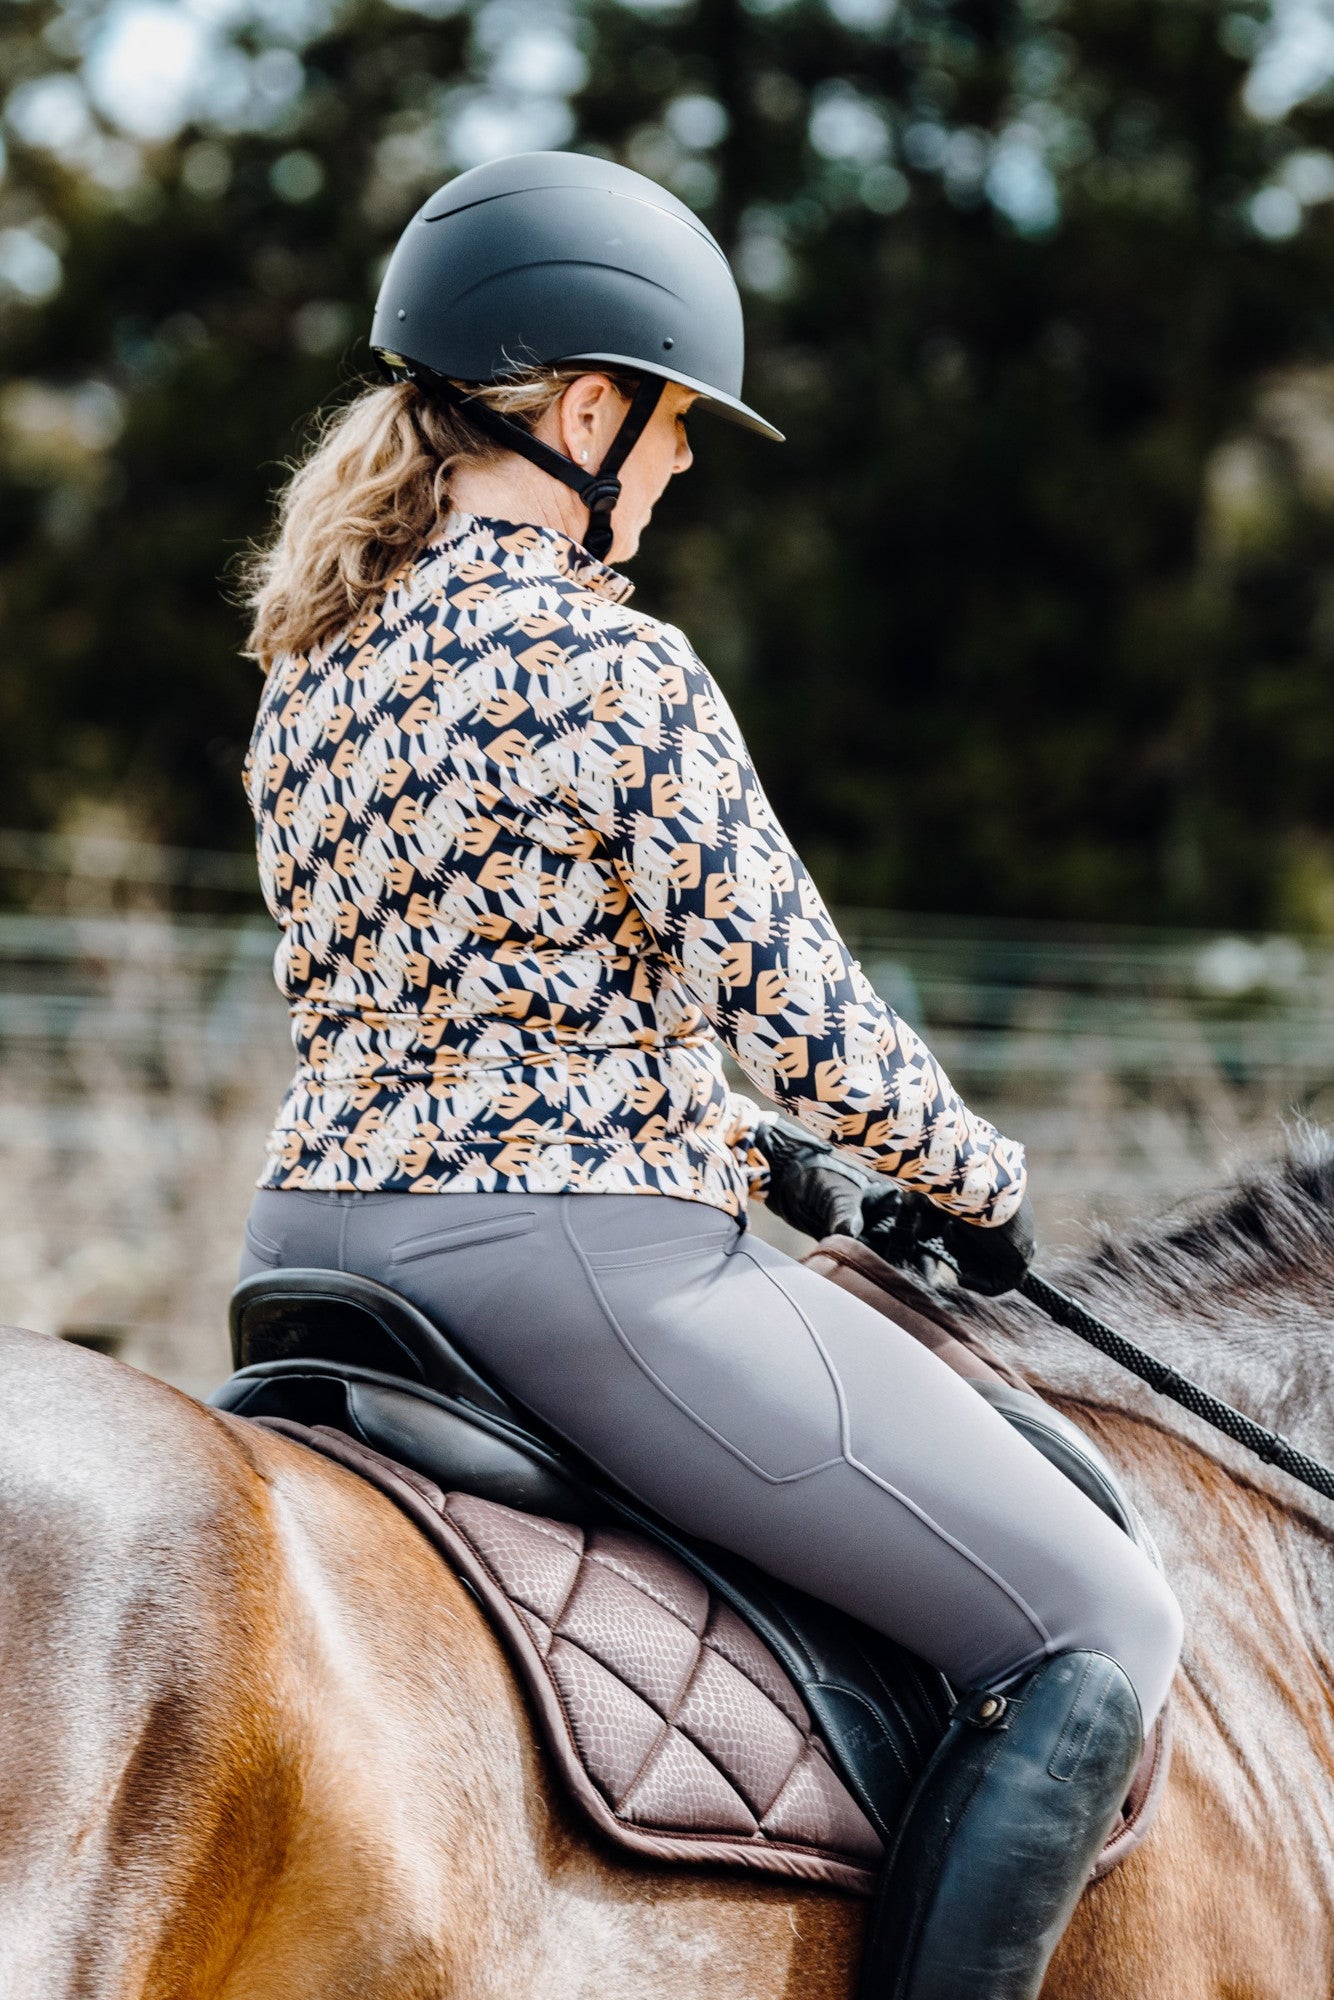 Women's Horse Riding Leggings. Winter Riding Tights with phone pocket. –  Saddle & Canter